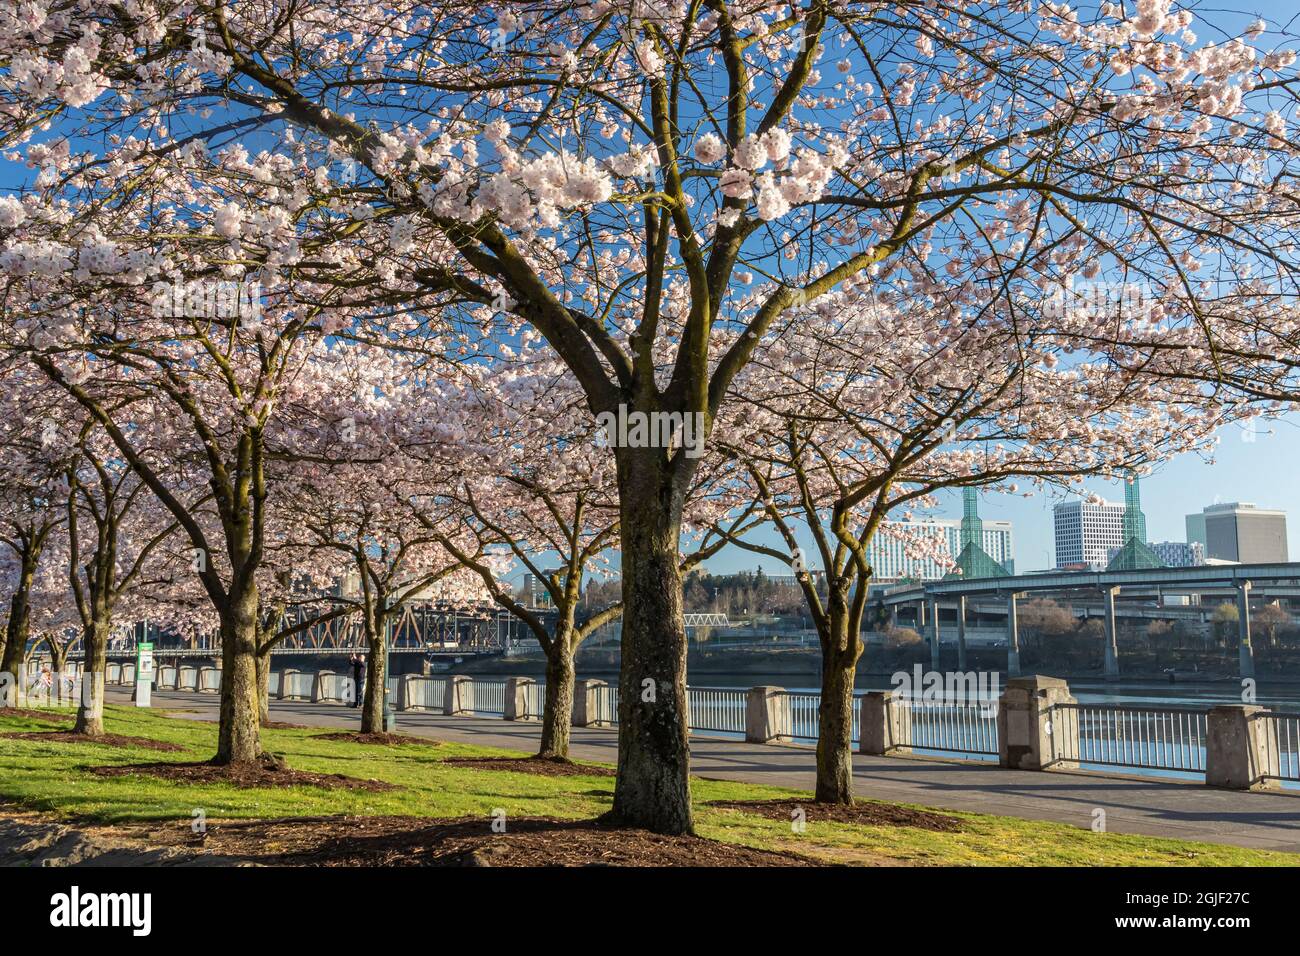 Portland, Oregon. Cherry trees in bloom at Tom McCall Waterfront Park on the Willamette River in downtown. Stock Photo